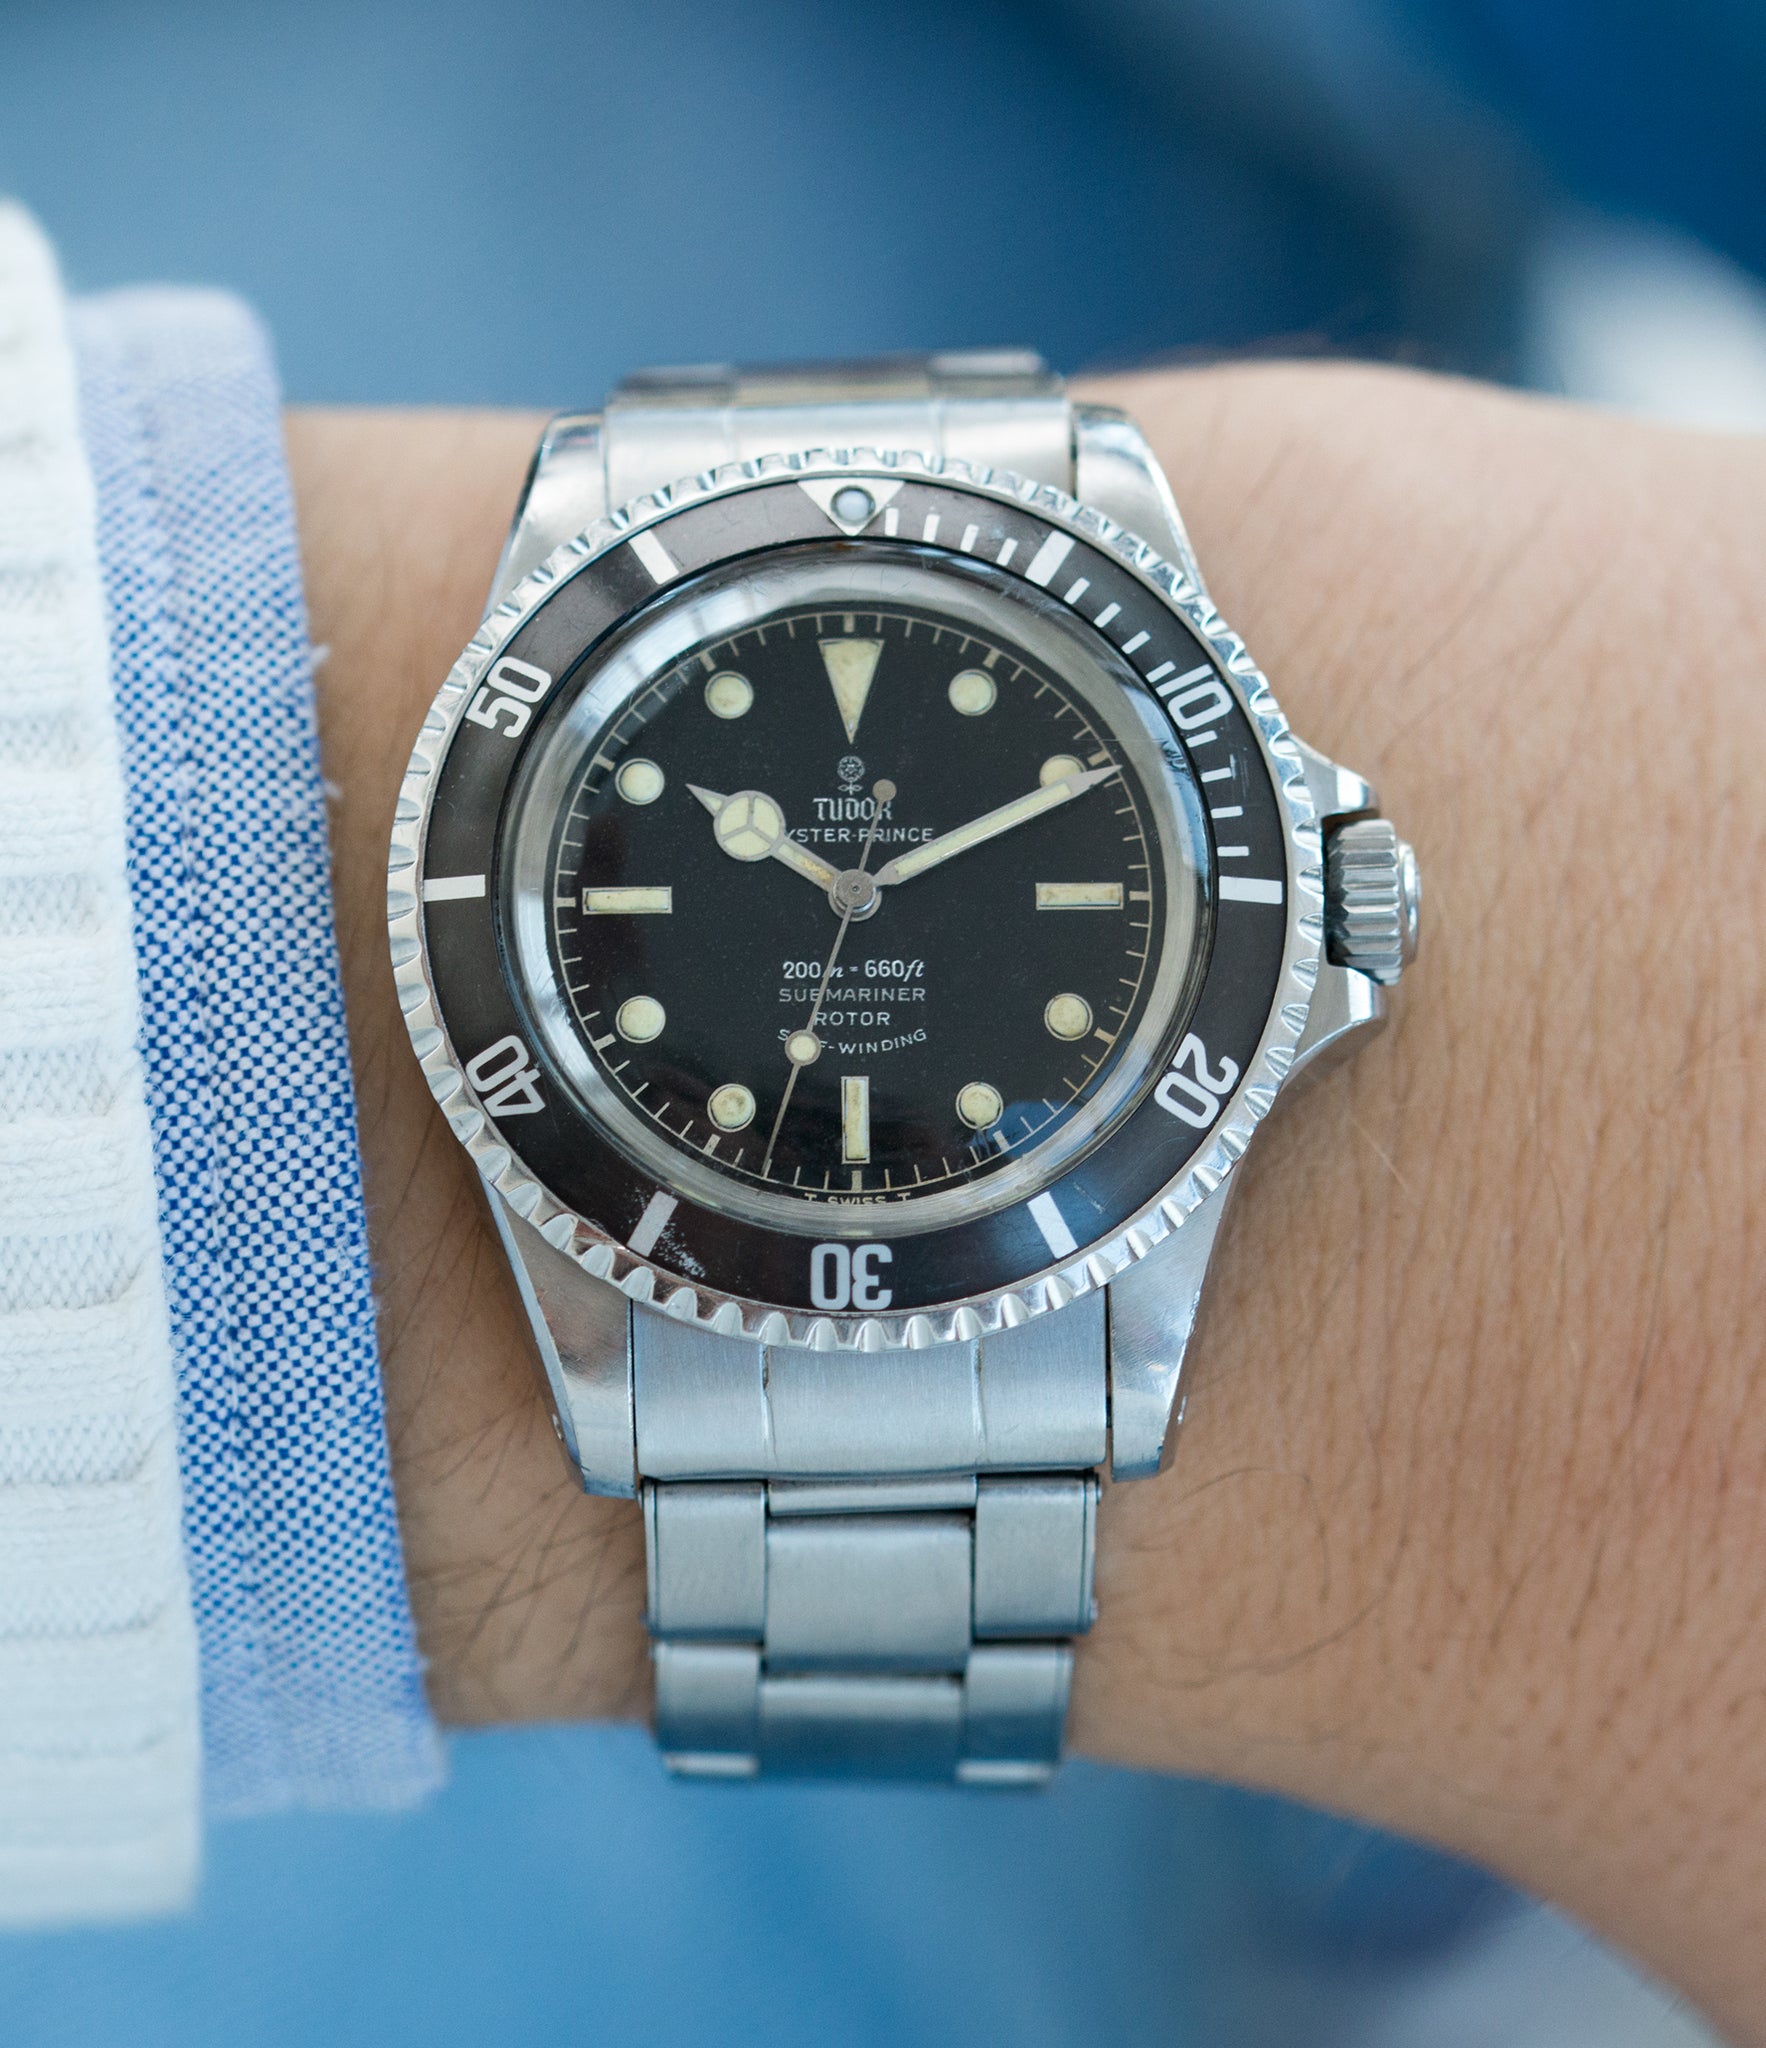 for sale vintage Tudor Submariner 7928 Oyster Prince Cal. 390 automatic sport watch at A Collected Man London online vintage watch specialist UK